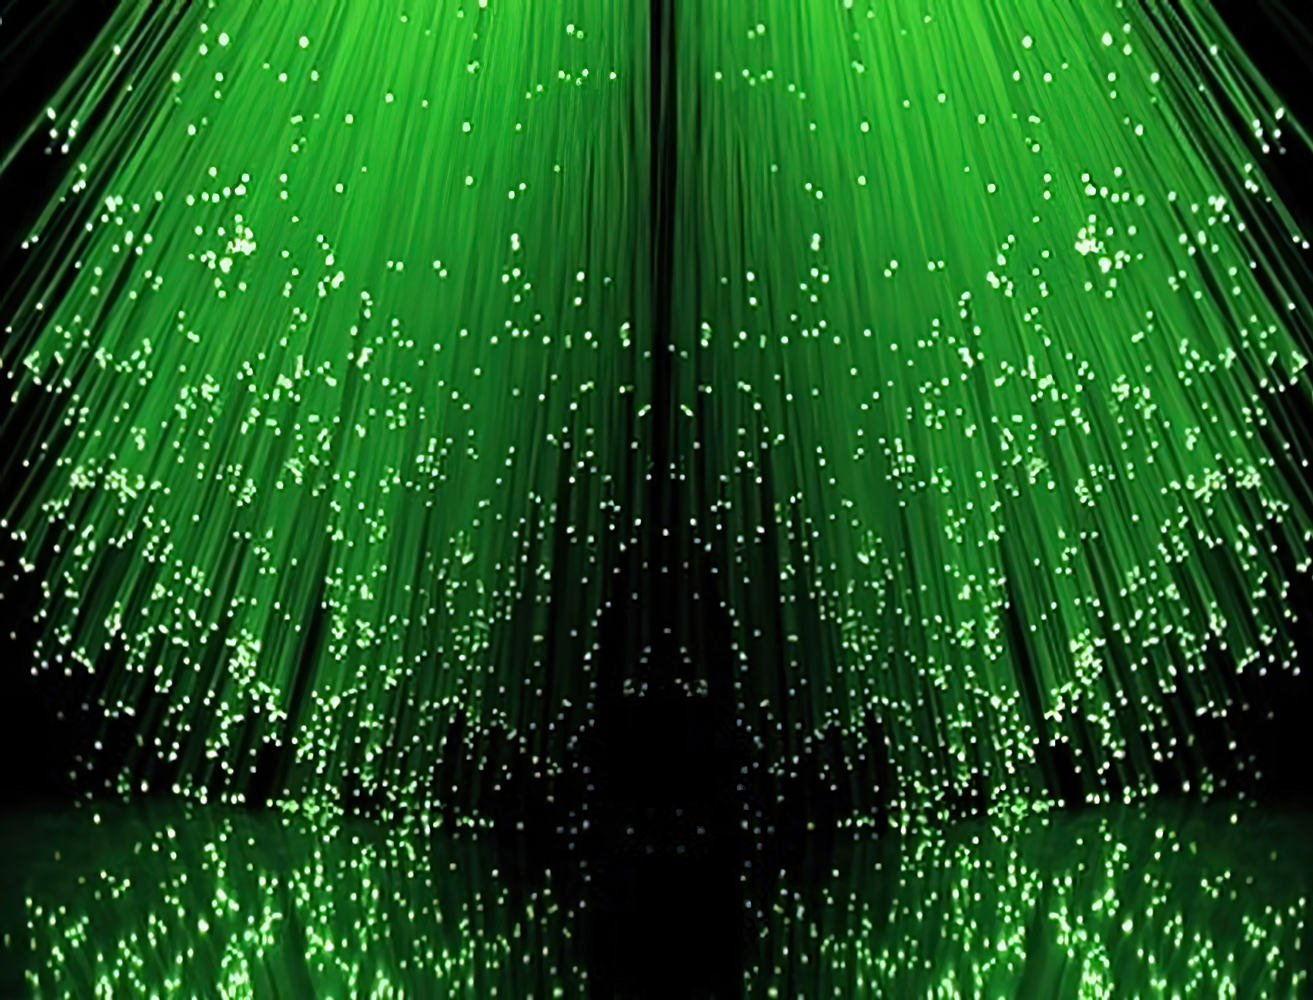 fibre_optic_green_cable_shower-gigapixel-low_res-height-1000px-cropped